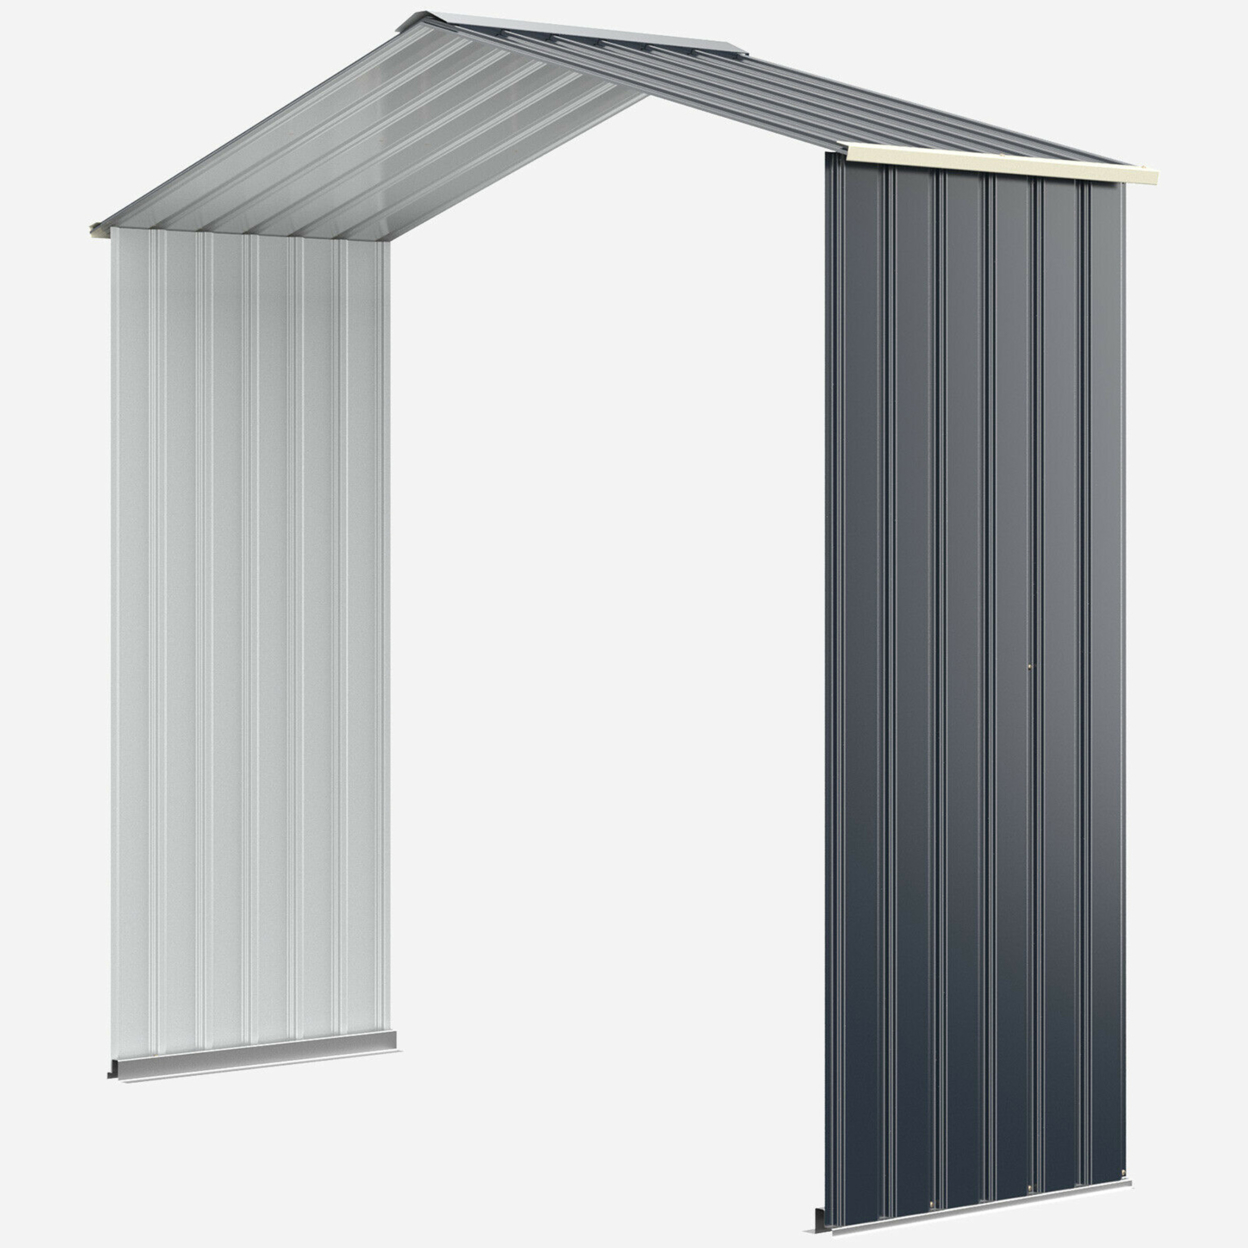 Outdoor Storage Shed Extension Kit For 7/9.1/11.2 Ft Shed Width Grey - Grey, For 7 Ft Shed